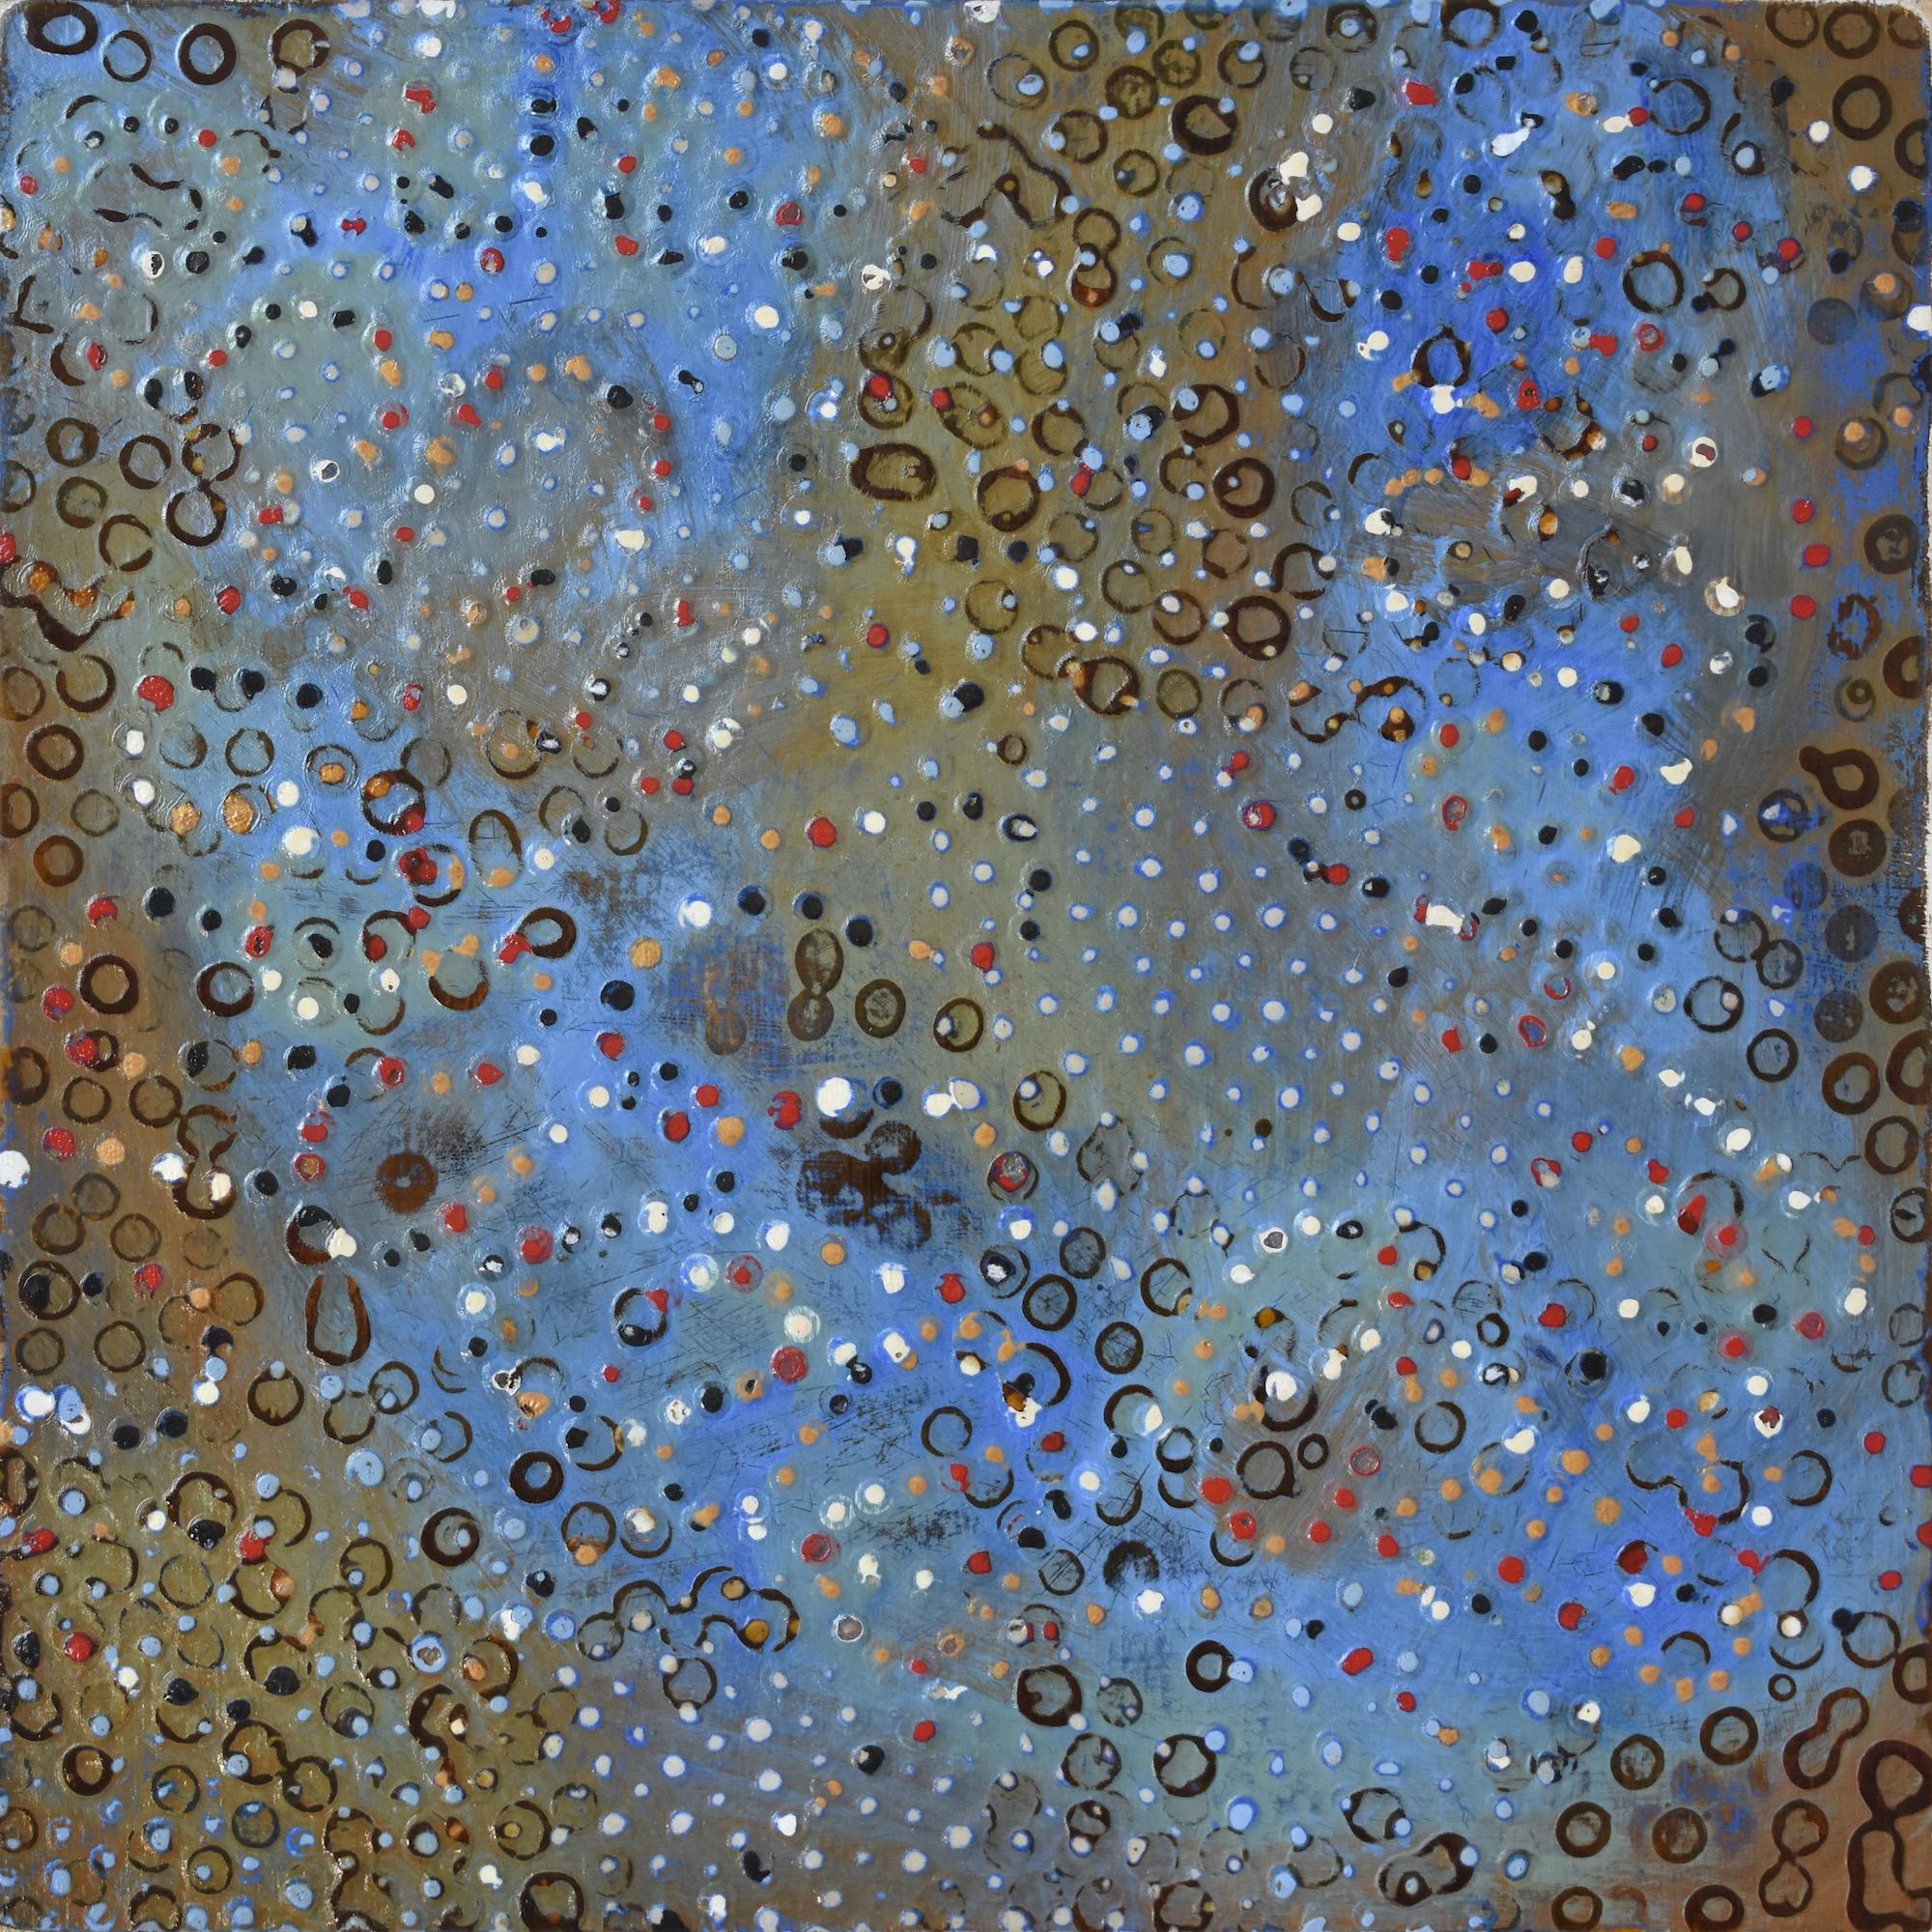 Abstract Painting Denise Driscoll - "ATCG 3", abstrait, points, vert, bleu, ocre, rouge, or, mixed media, peinture.